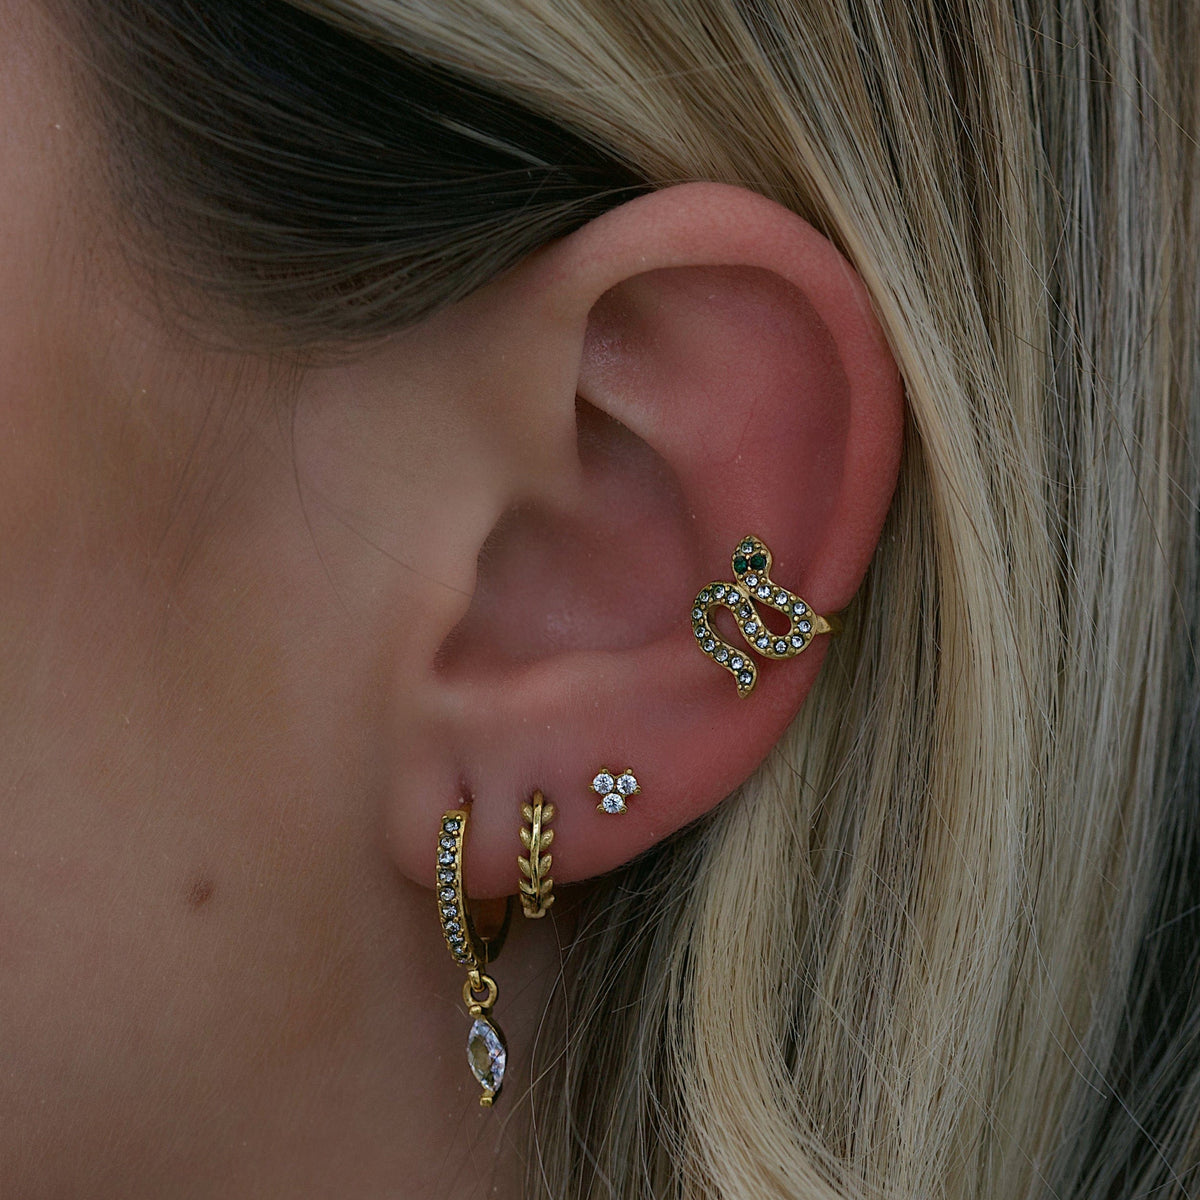 BOHOMOON Stainless Steel Slither Ear Cuff